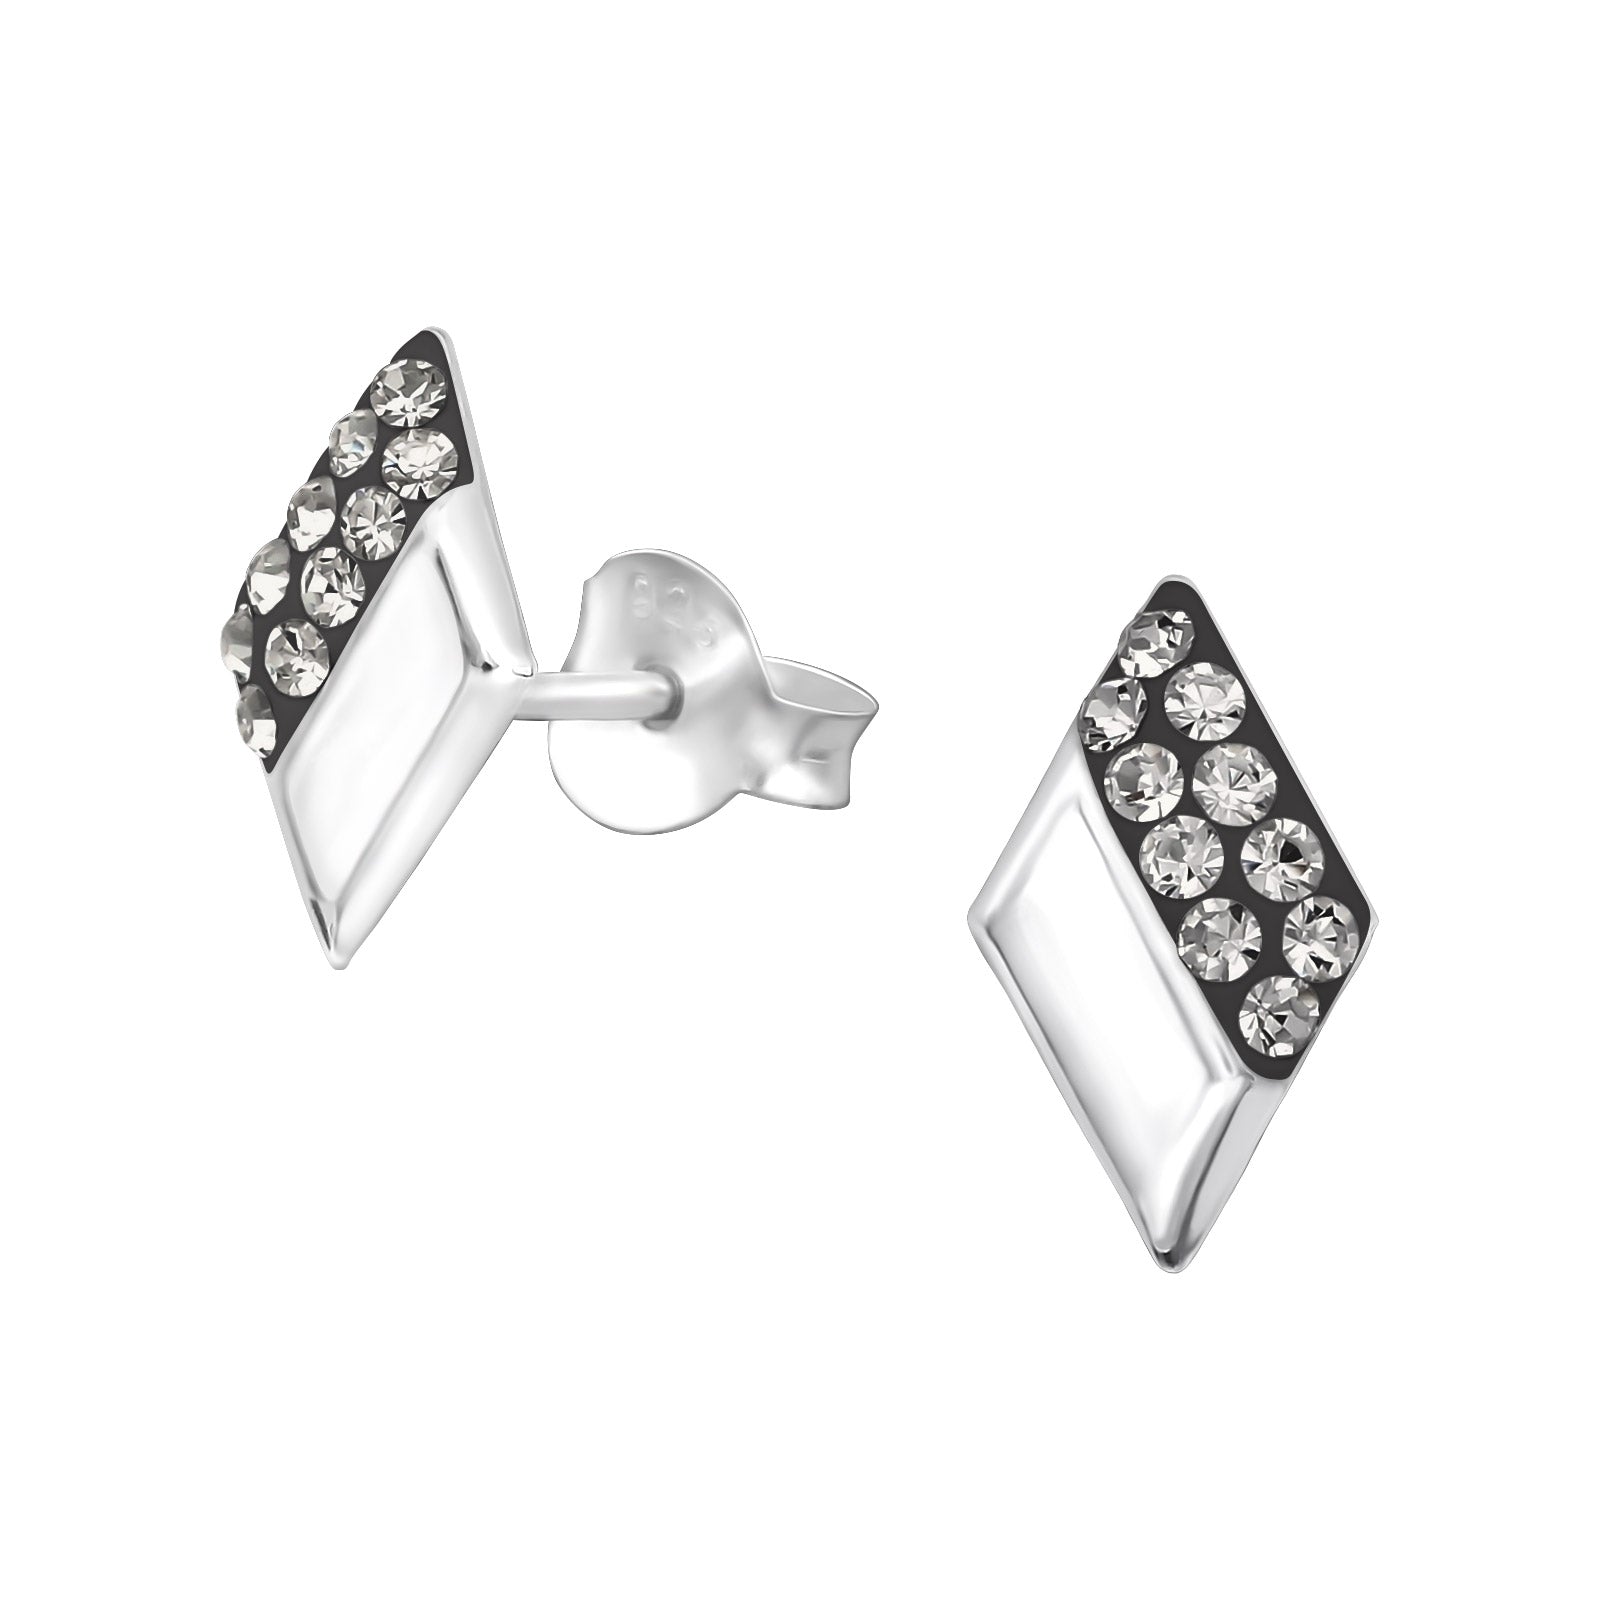 Model: ES32016ELF Colour: Silver Material: 925 Sterling Silver, Crystal Style: Sterling Silver Studs, Diamond Shape Size: 6mm*10mm Weight: 0.45g